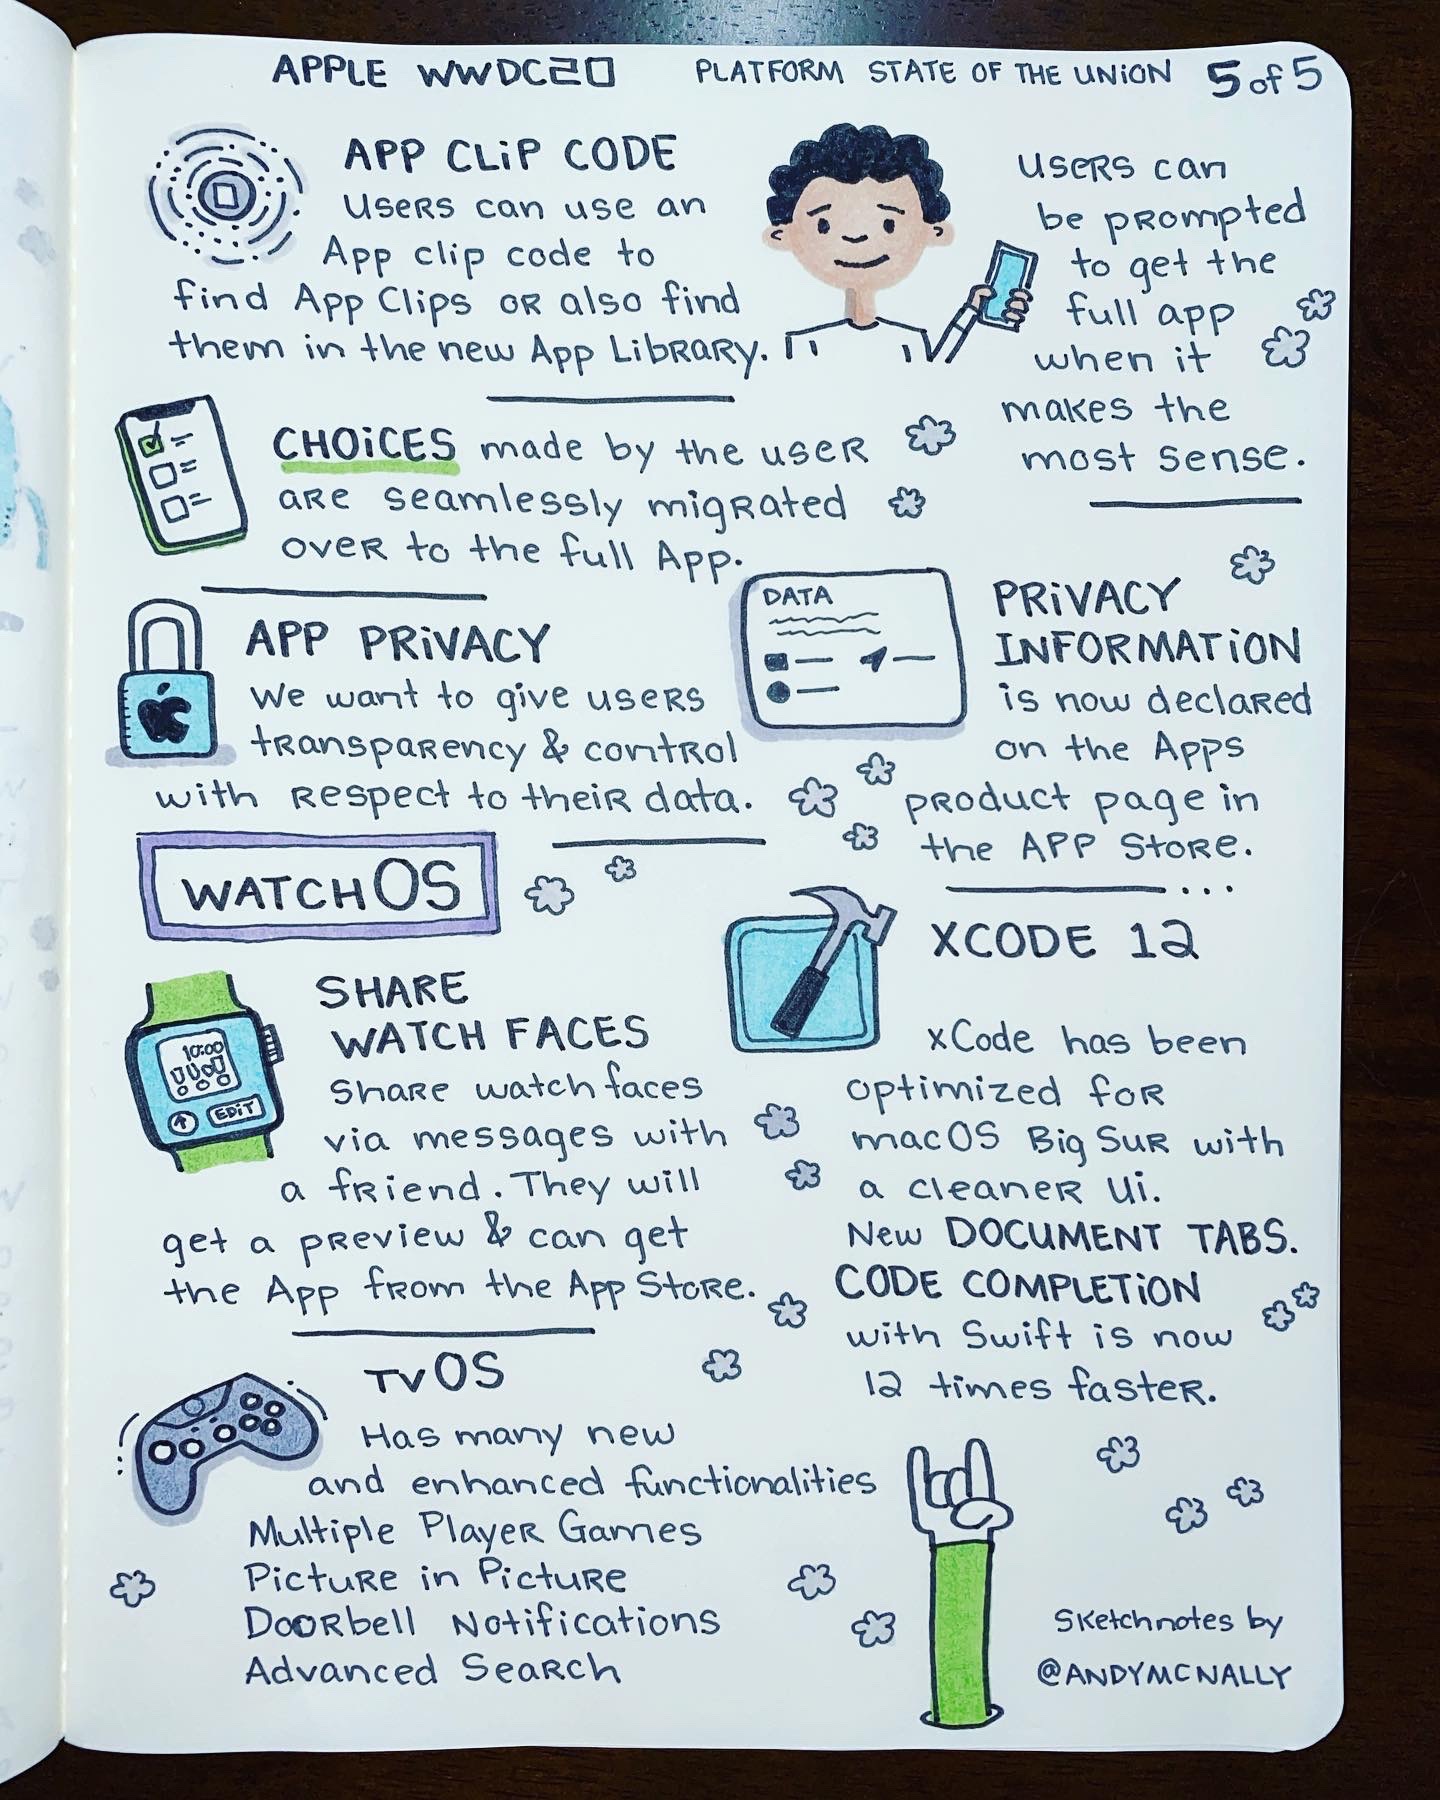 Apple Platforms State of the Union - WWDC 2020 drawing 5 of 5